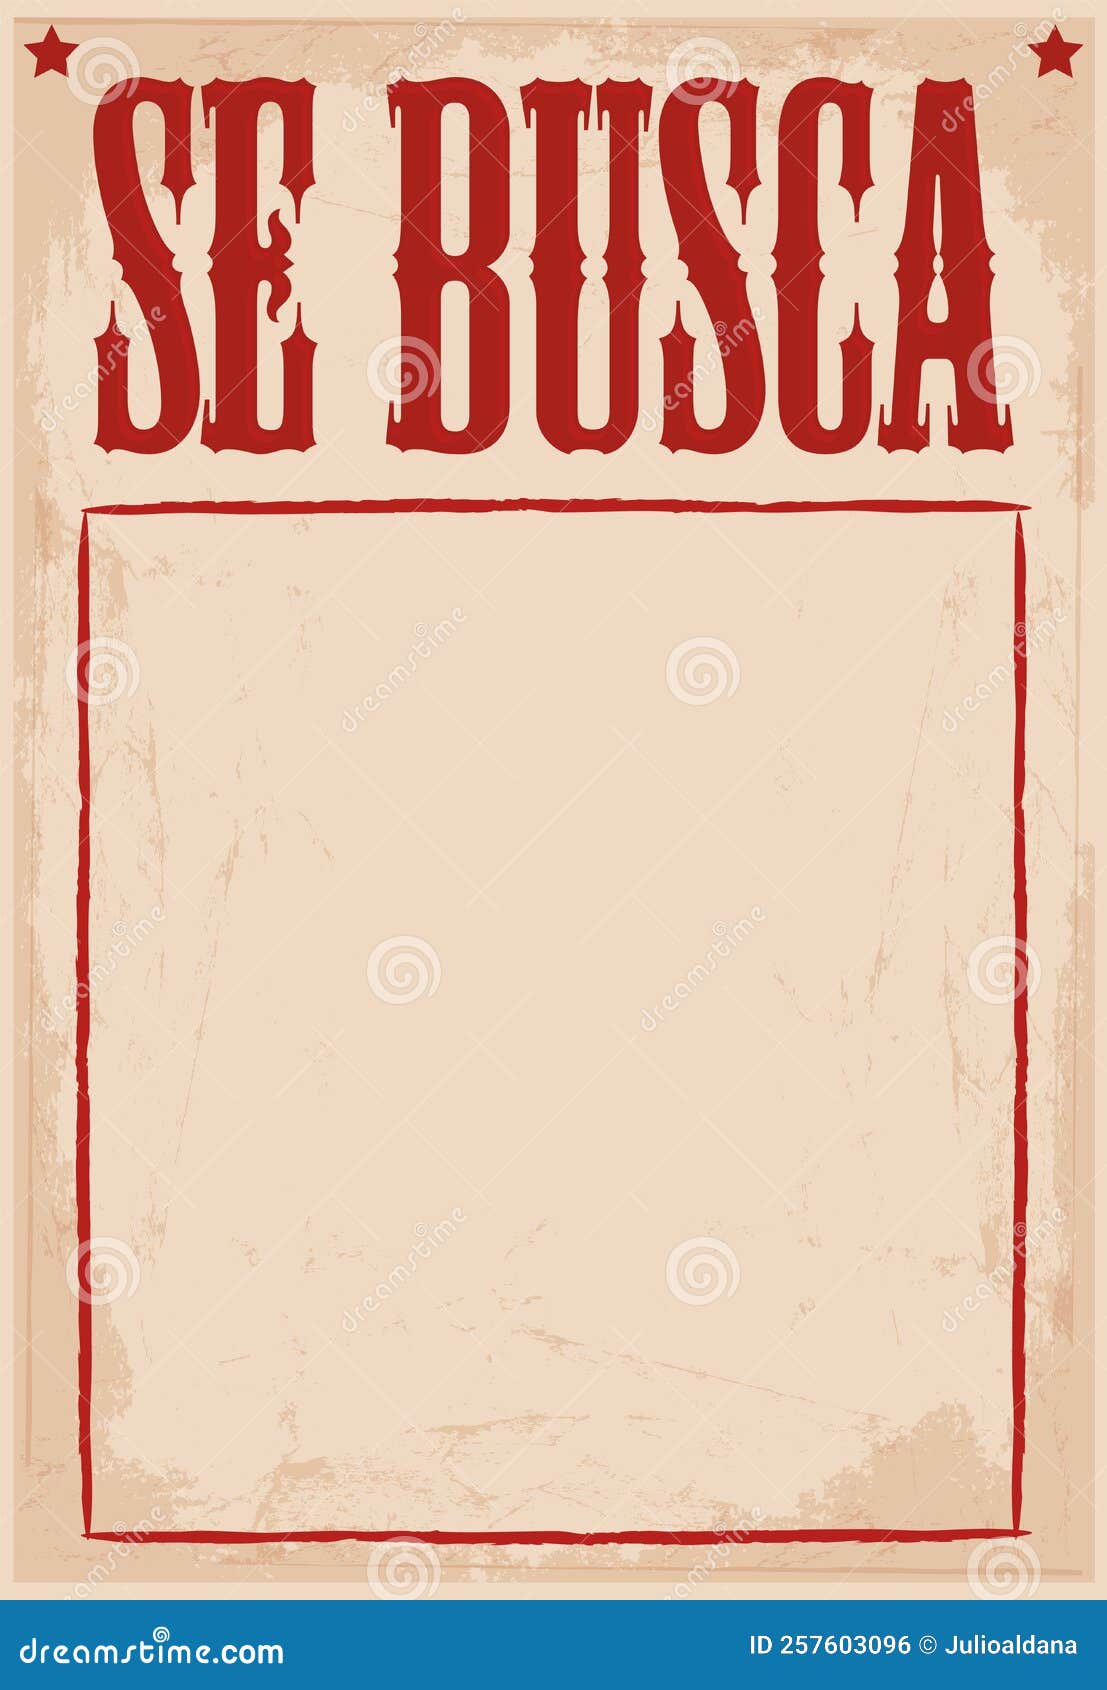 se busca, wanted poster spanish text template.